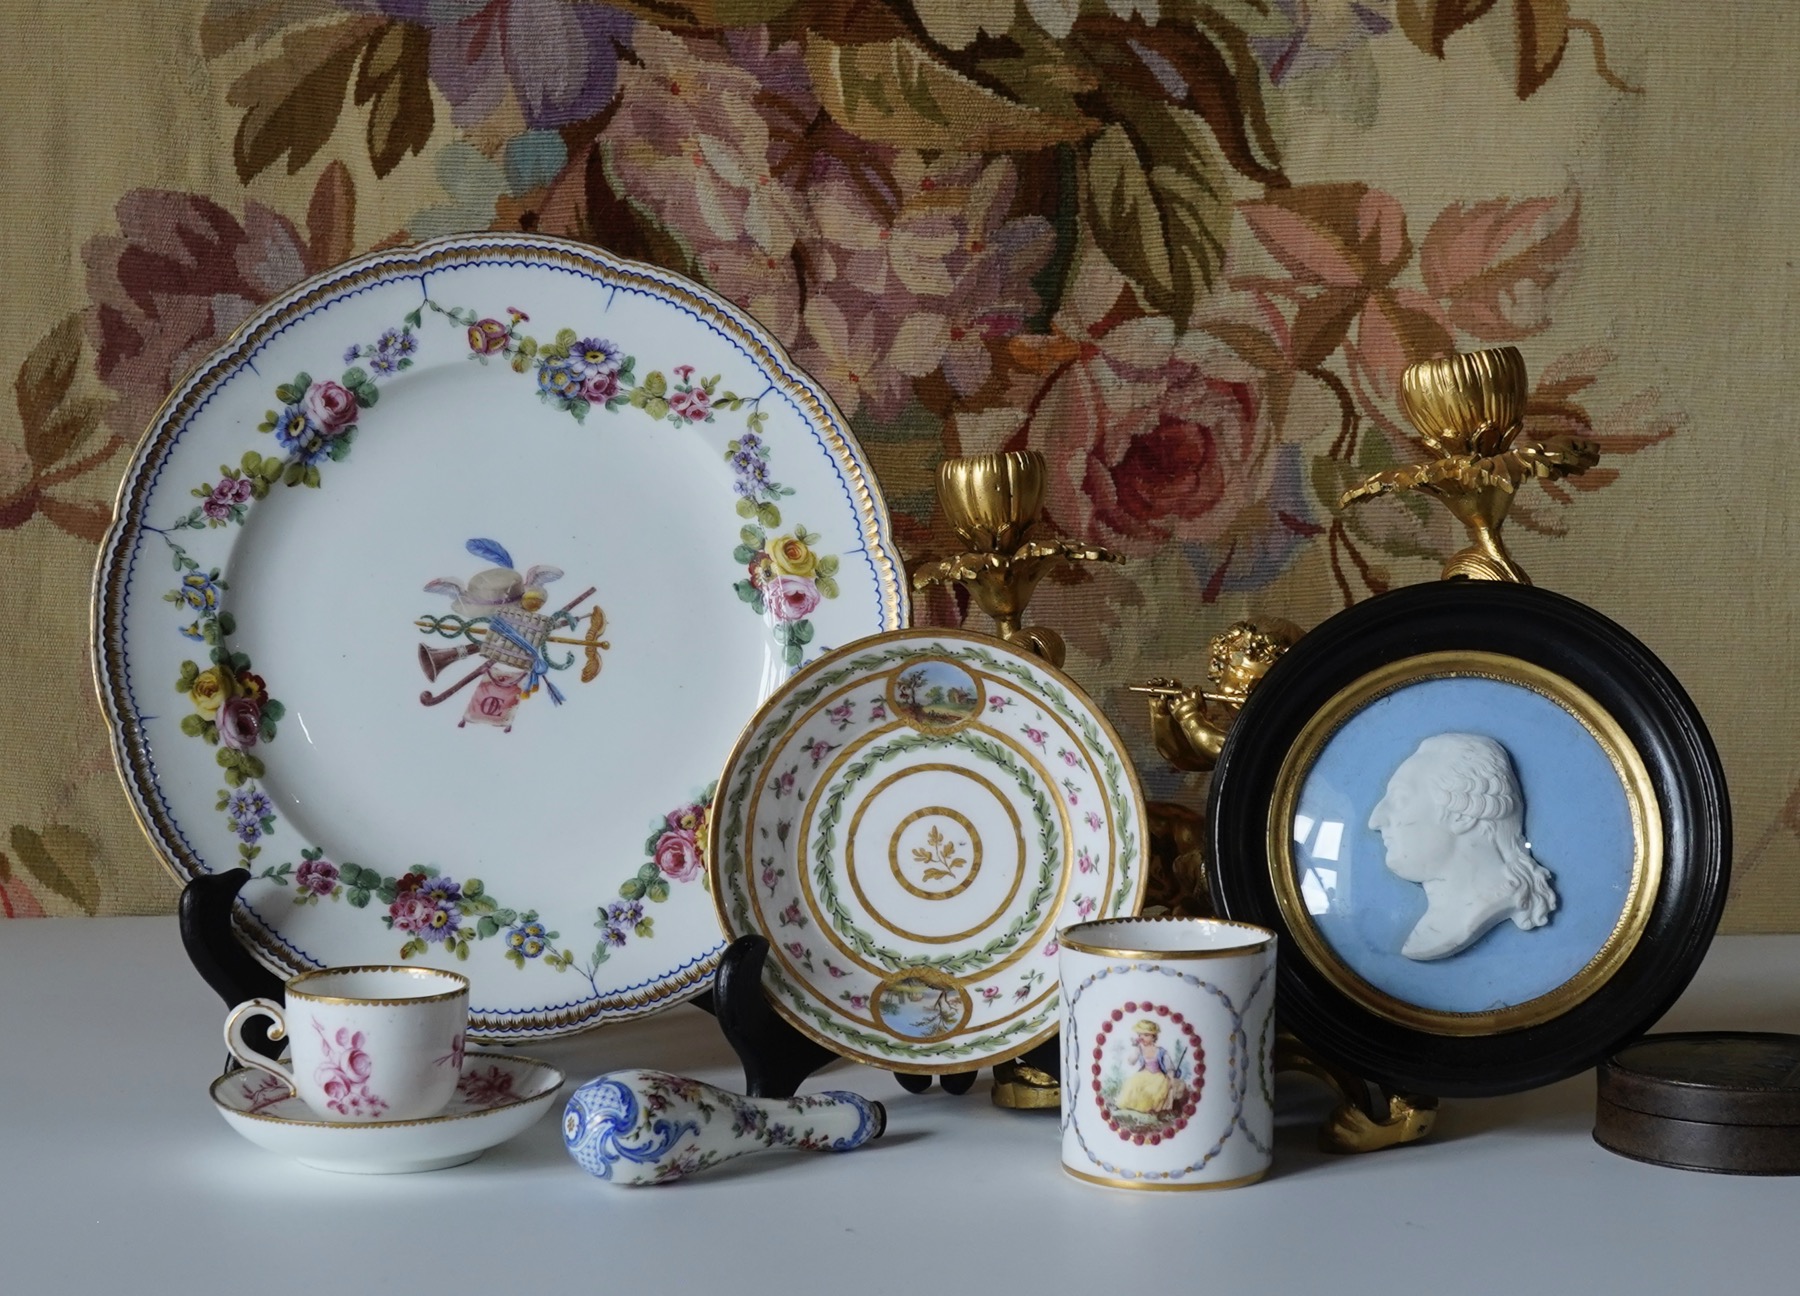 French Royalty, Sèvres Porcelain including portrait of Louis XV, 18th century 